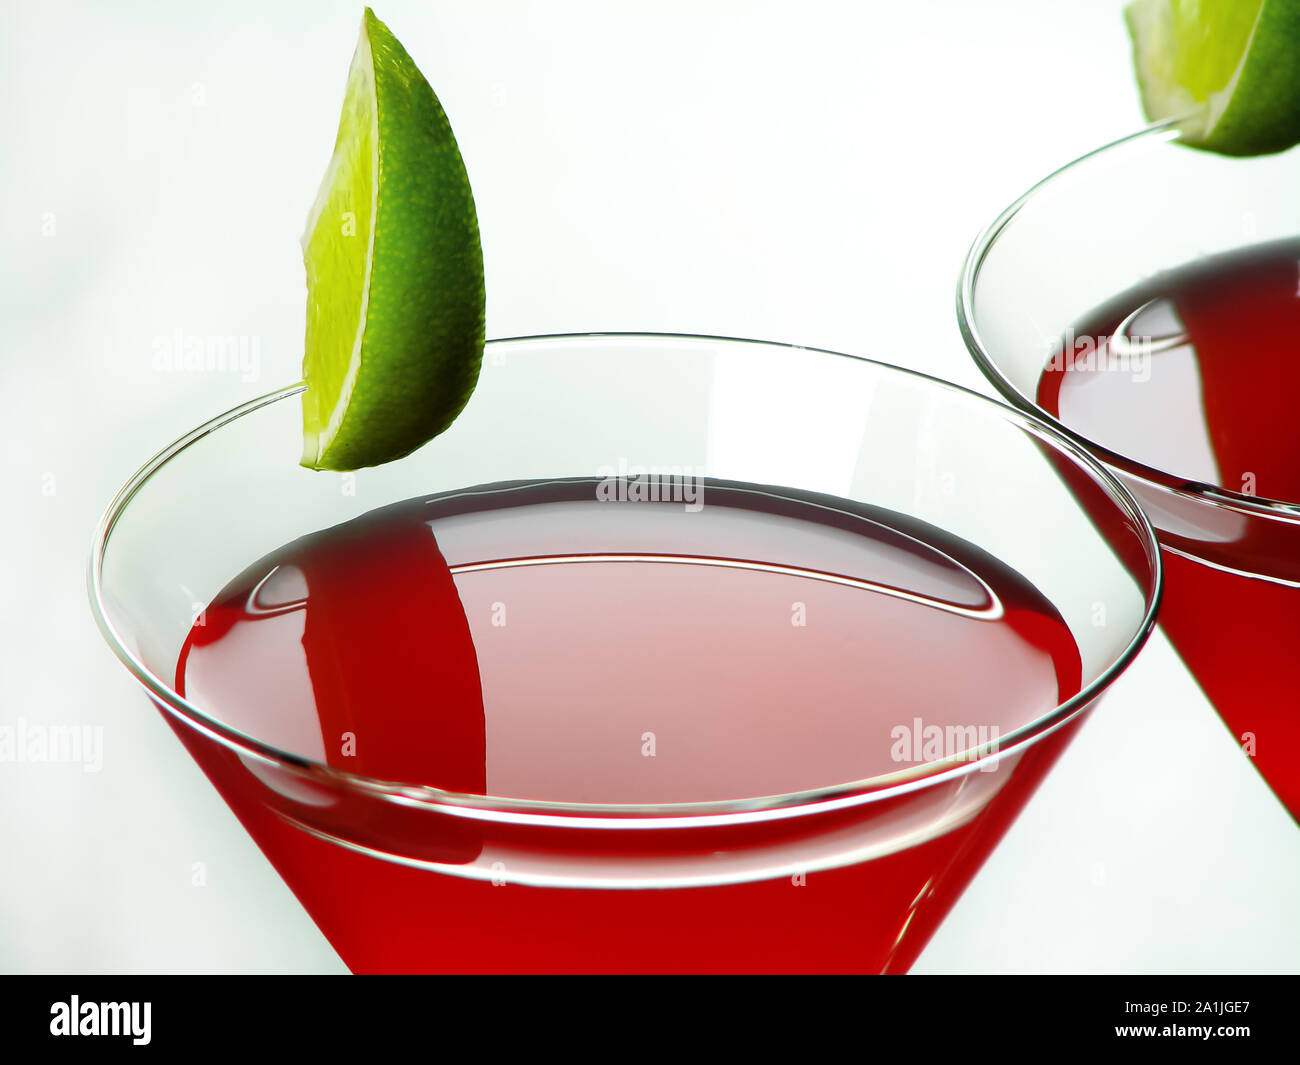 Bright red Bacardi alcoholic cocktail of white rum, lime juice and grenadine, in cocktail glasses decorated with lime slices, on a light background Stock Photo